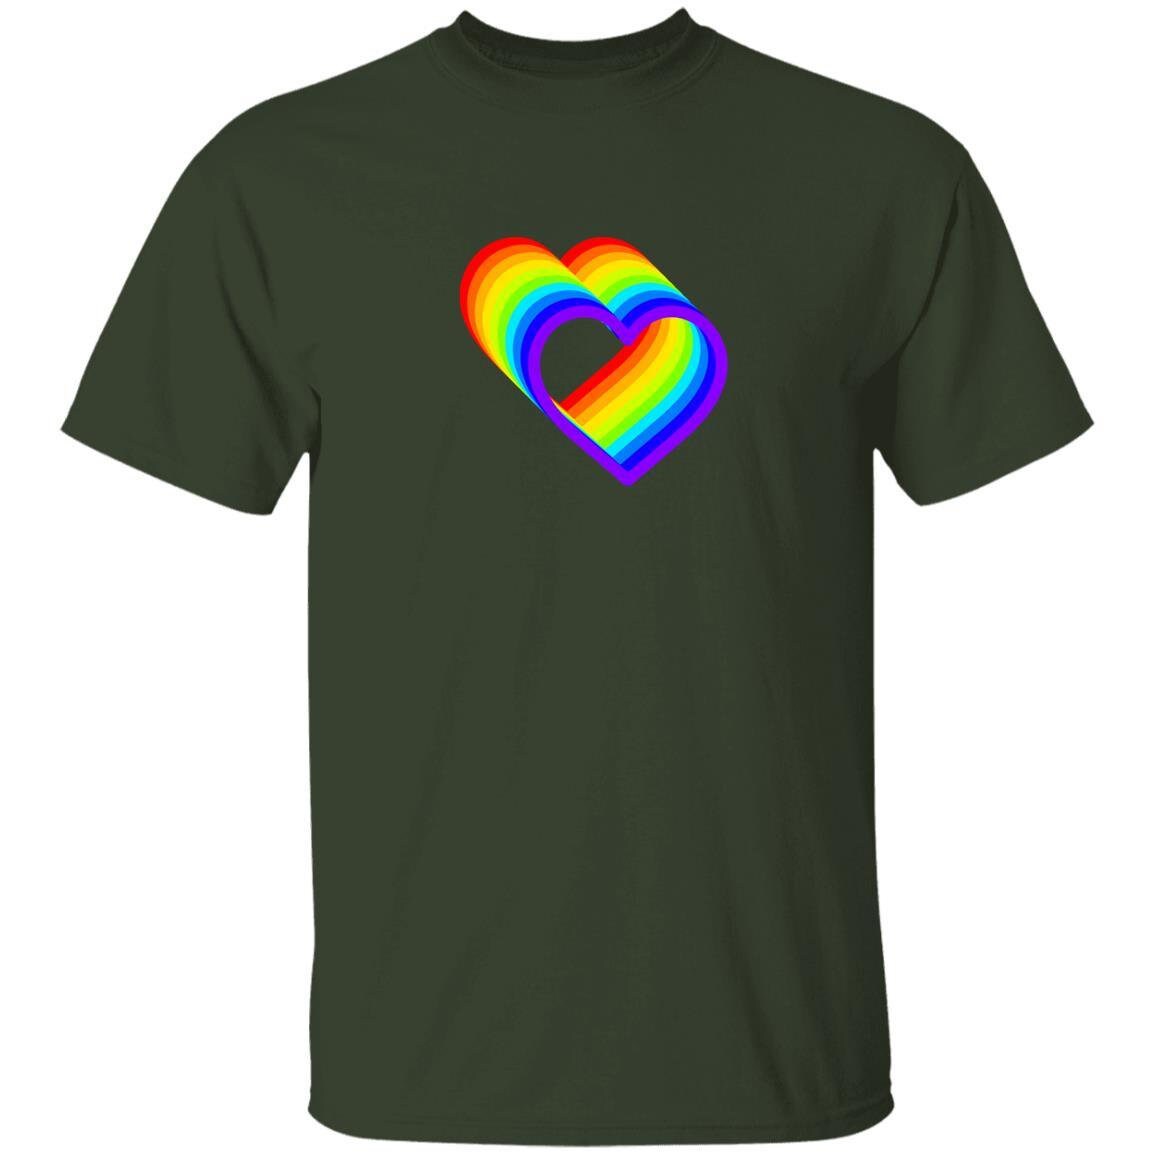 Rainbow Heart- t-shirt | GIFTS FOR ANYONE (Green, Brown, Orange, Red, Maroon, Purple)